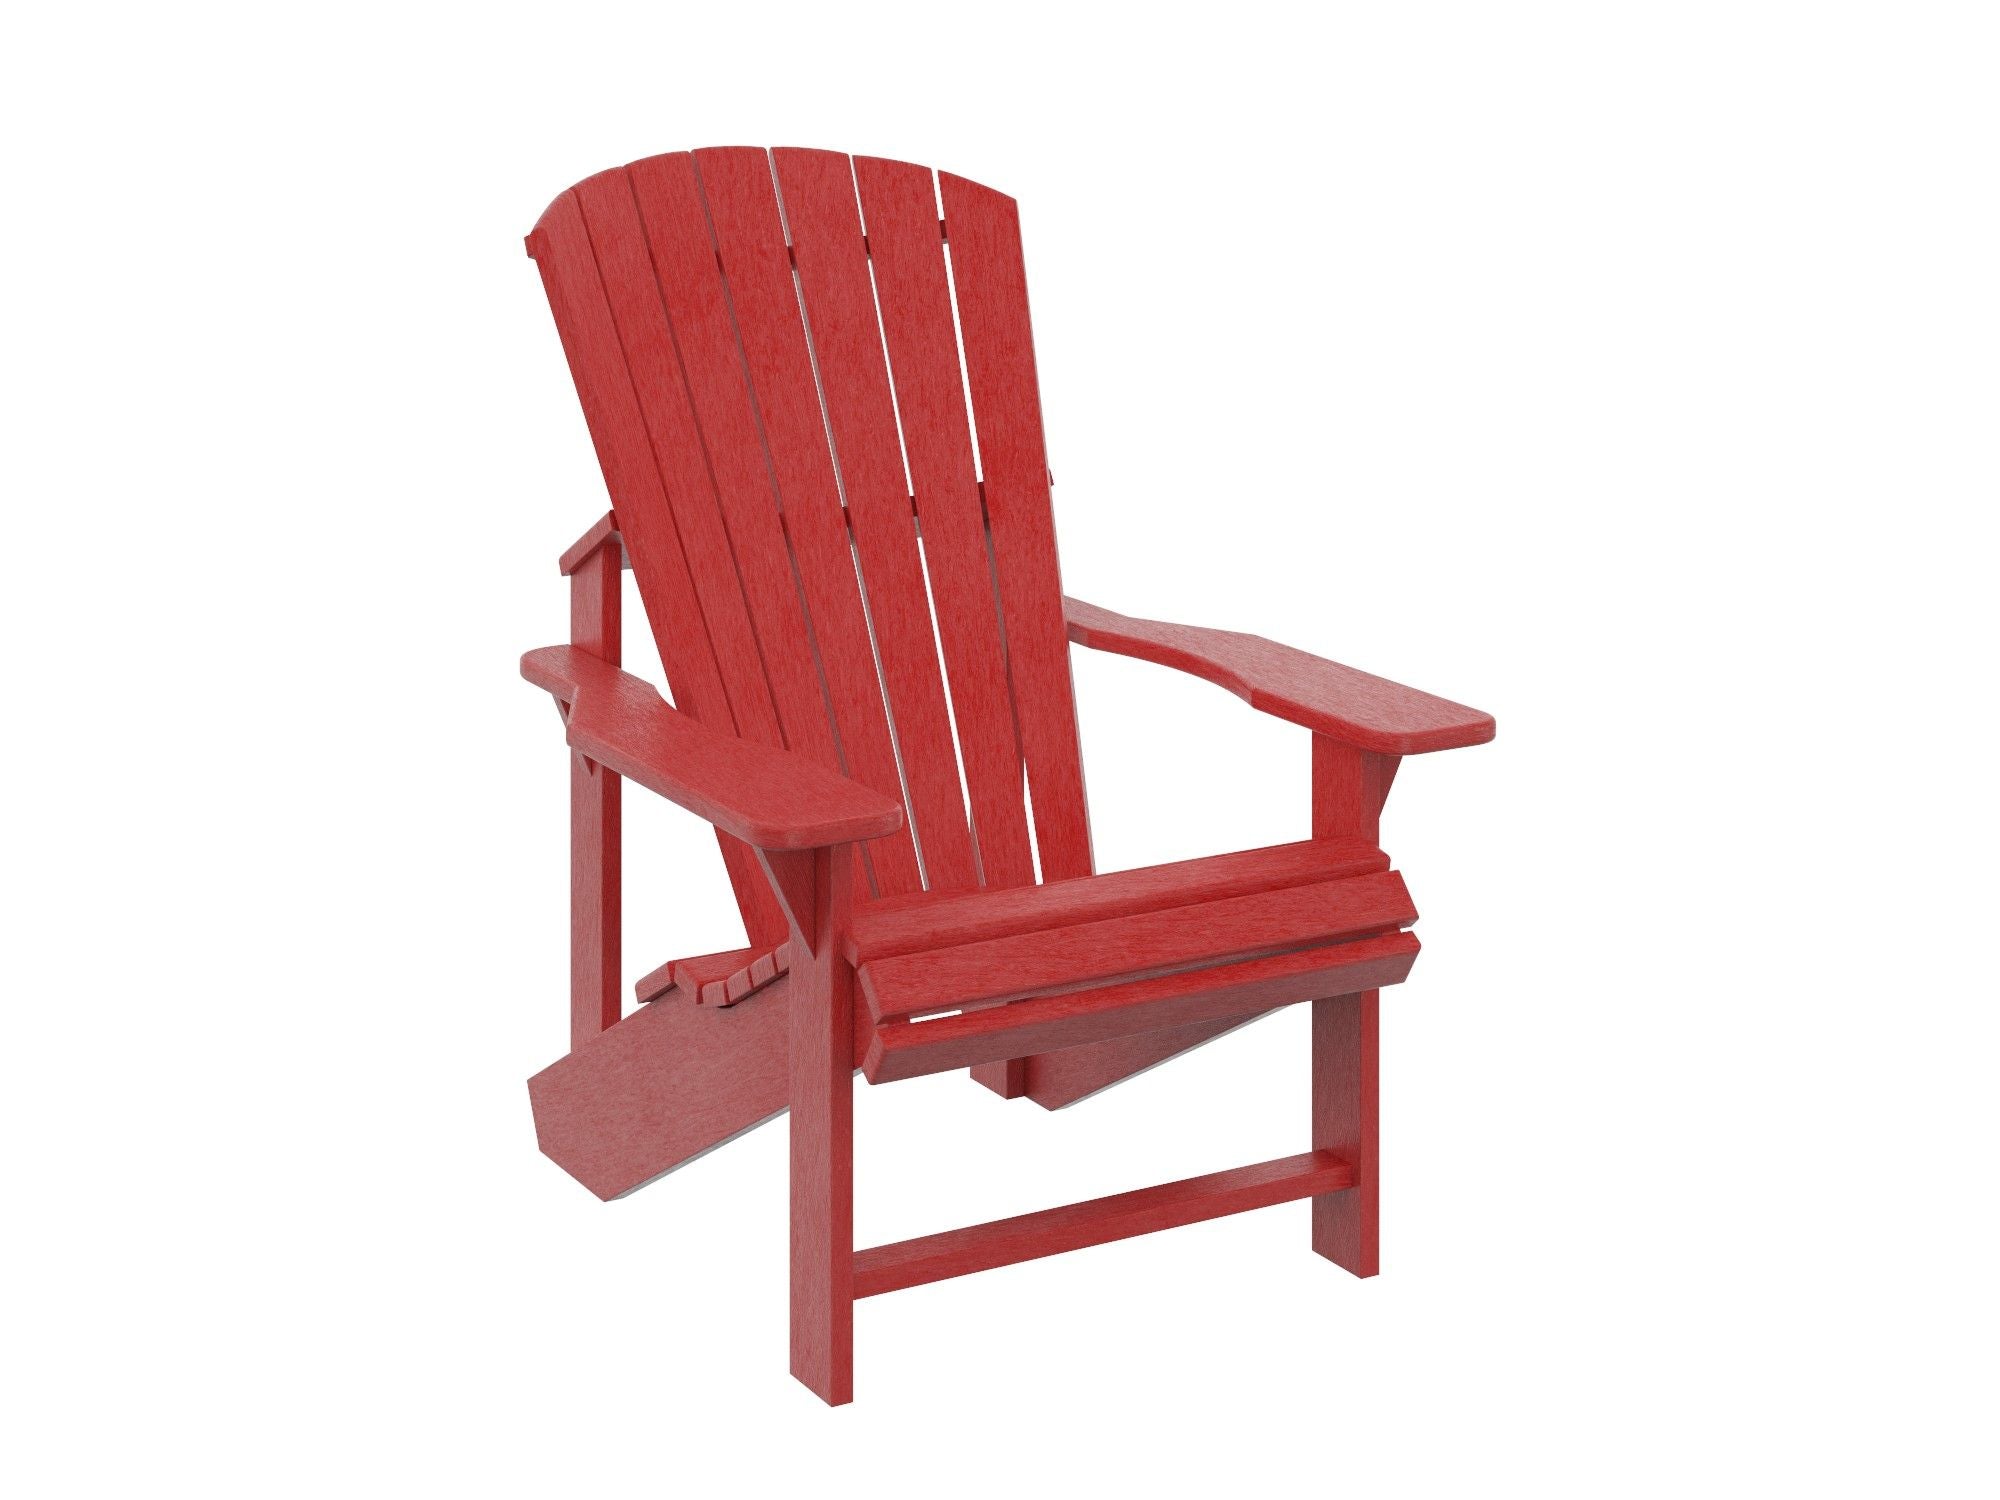 C.R. Plastic Products Classic Adirondack Chairs Outdoor Chairs Red 12032656